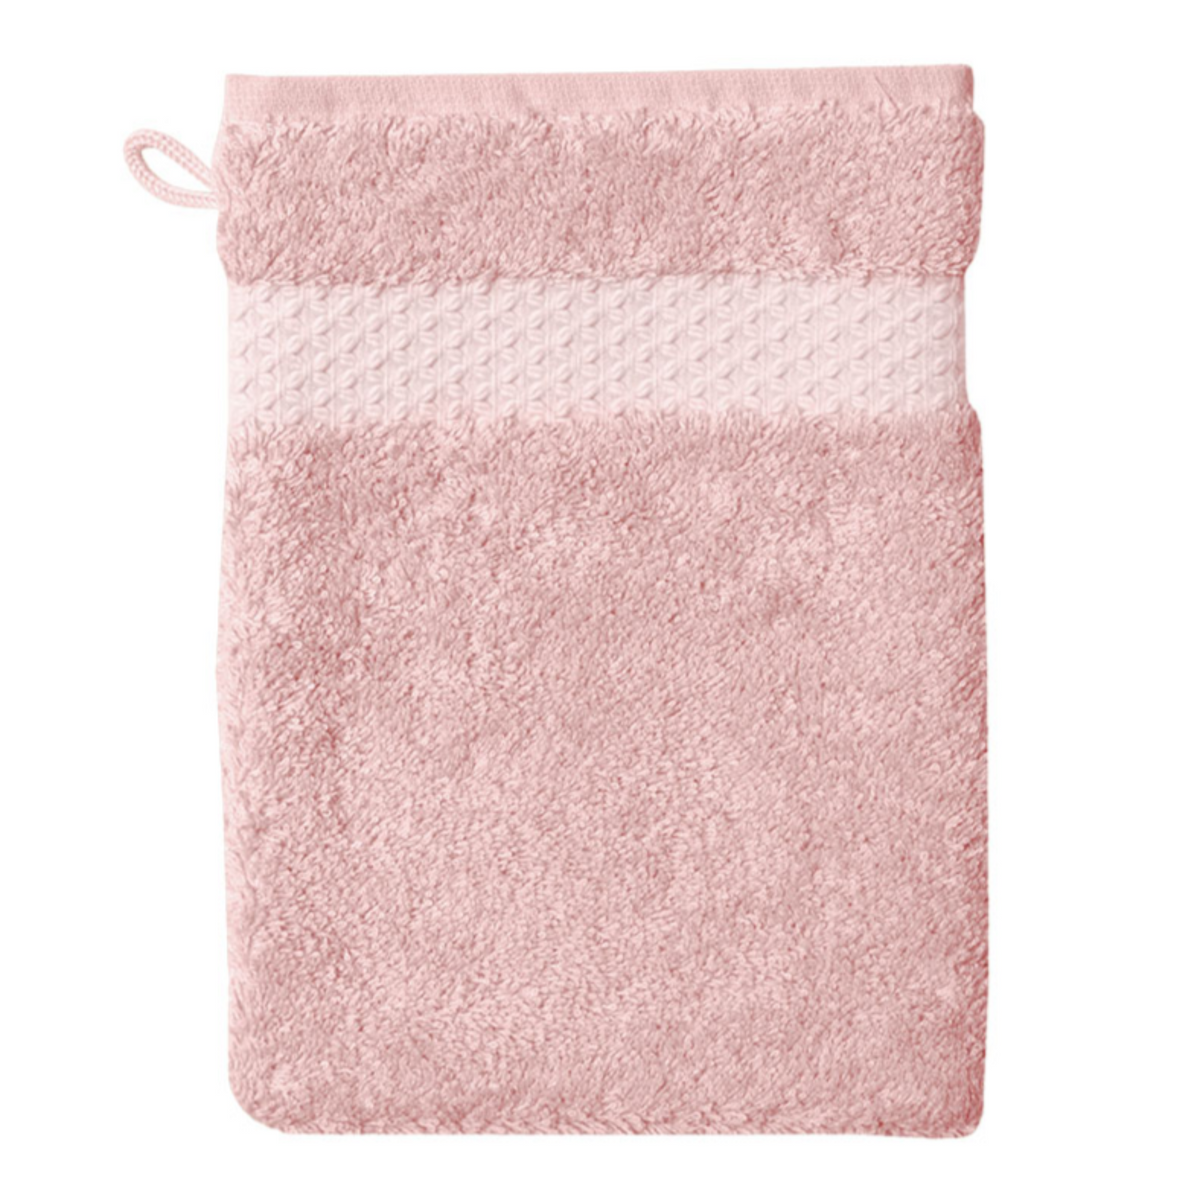 Bath Mitt of Yves Delorme Etoile Bath Collection in The Rose Color